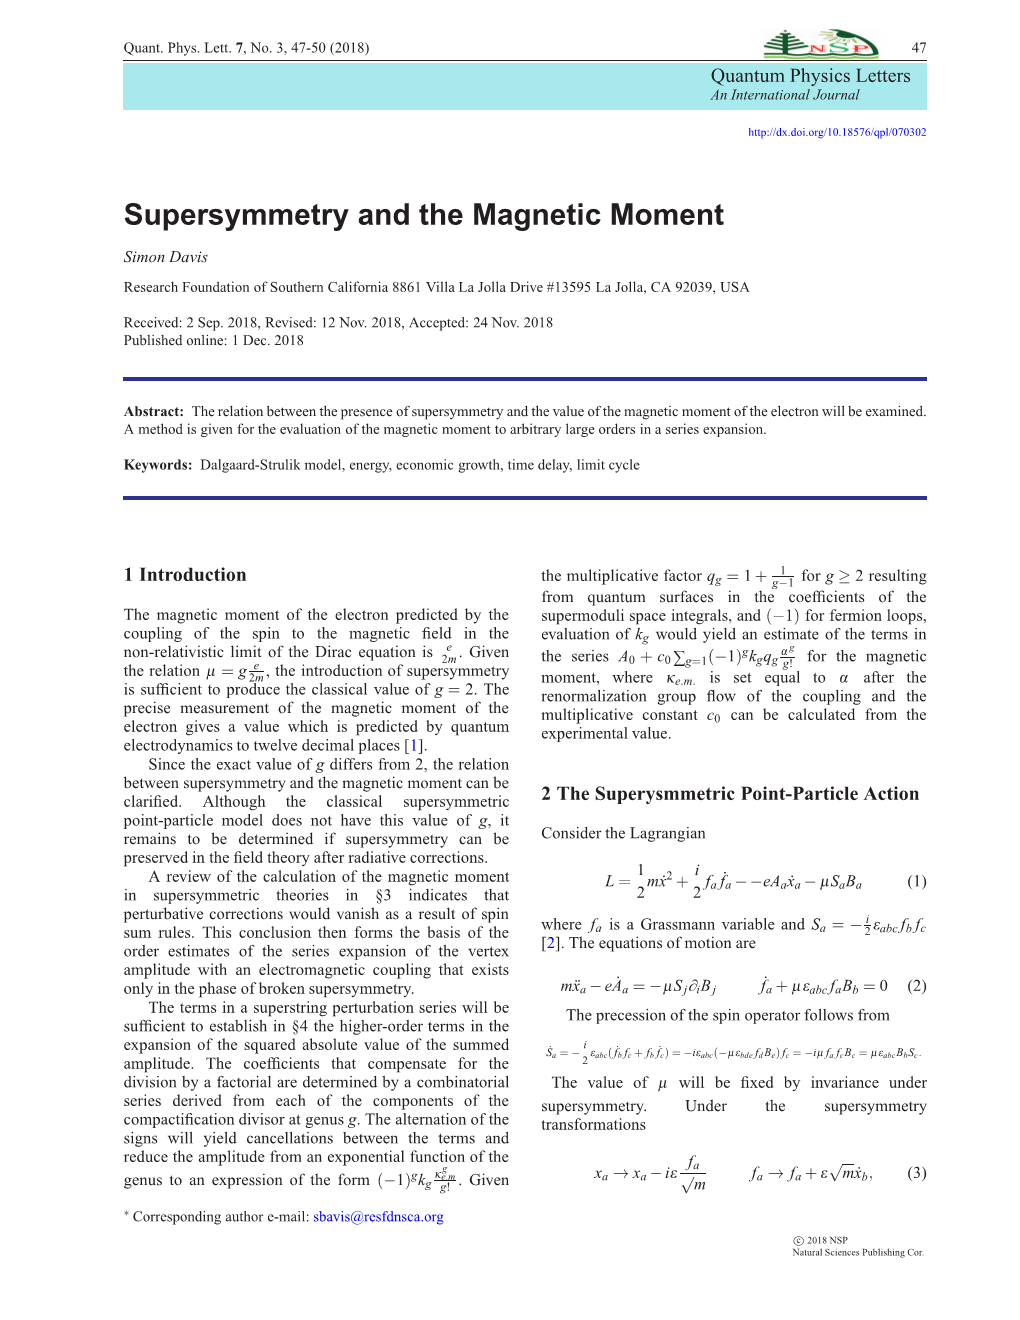 Supersymmetry and the Magnetic Moment